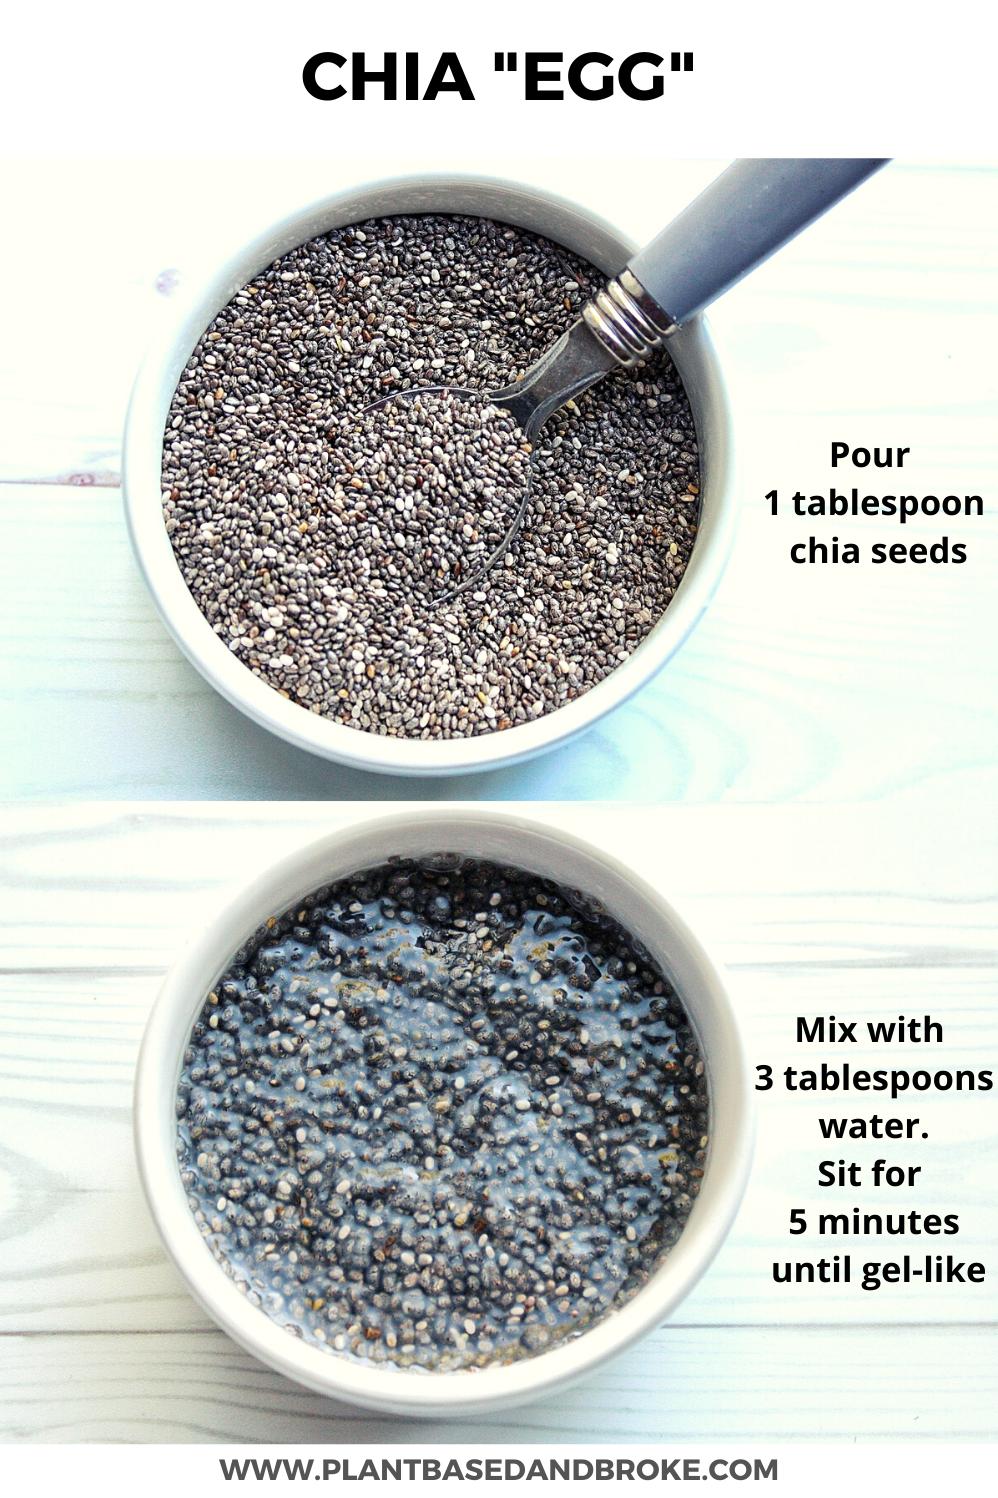  Say goodbye to traditional egg replacers and try this nutritious and versatile chia egg replacer instead.